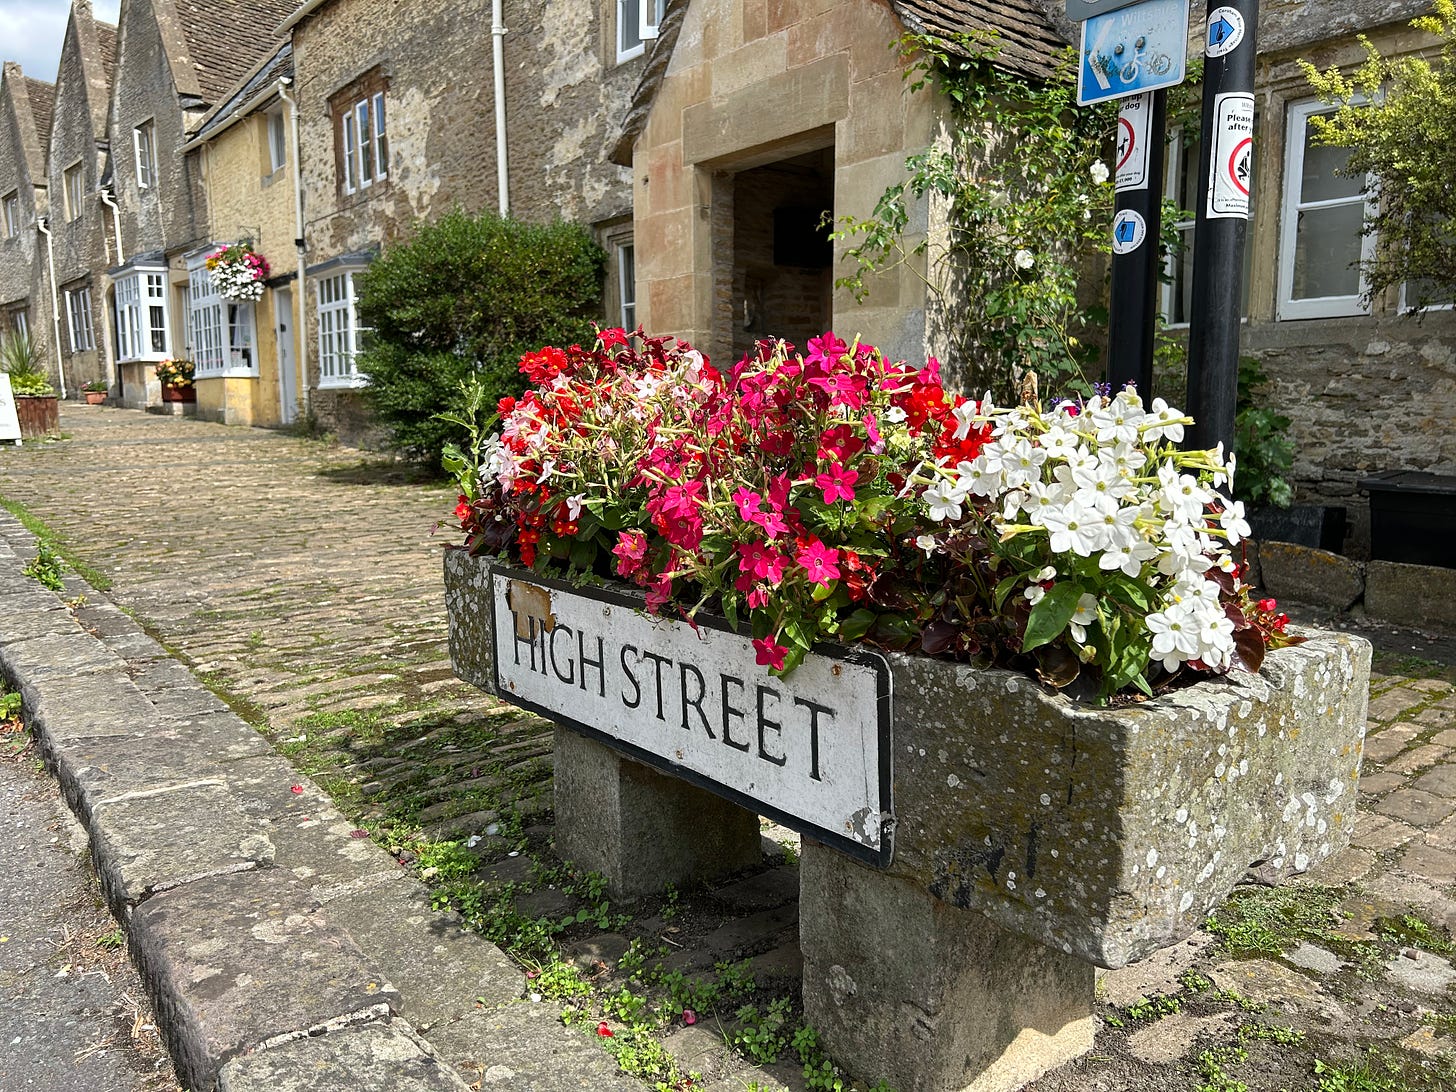 A street sign for the High Street on the side of a stone flower trough filled with summer flowers. Behind is a row of stone cottages and a cobbled pavement. Image: Roland's Travels The High Street, Corsham, Wiltshire